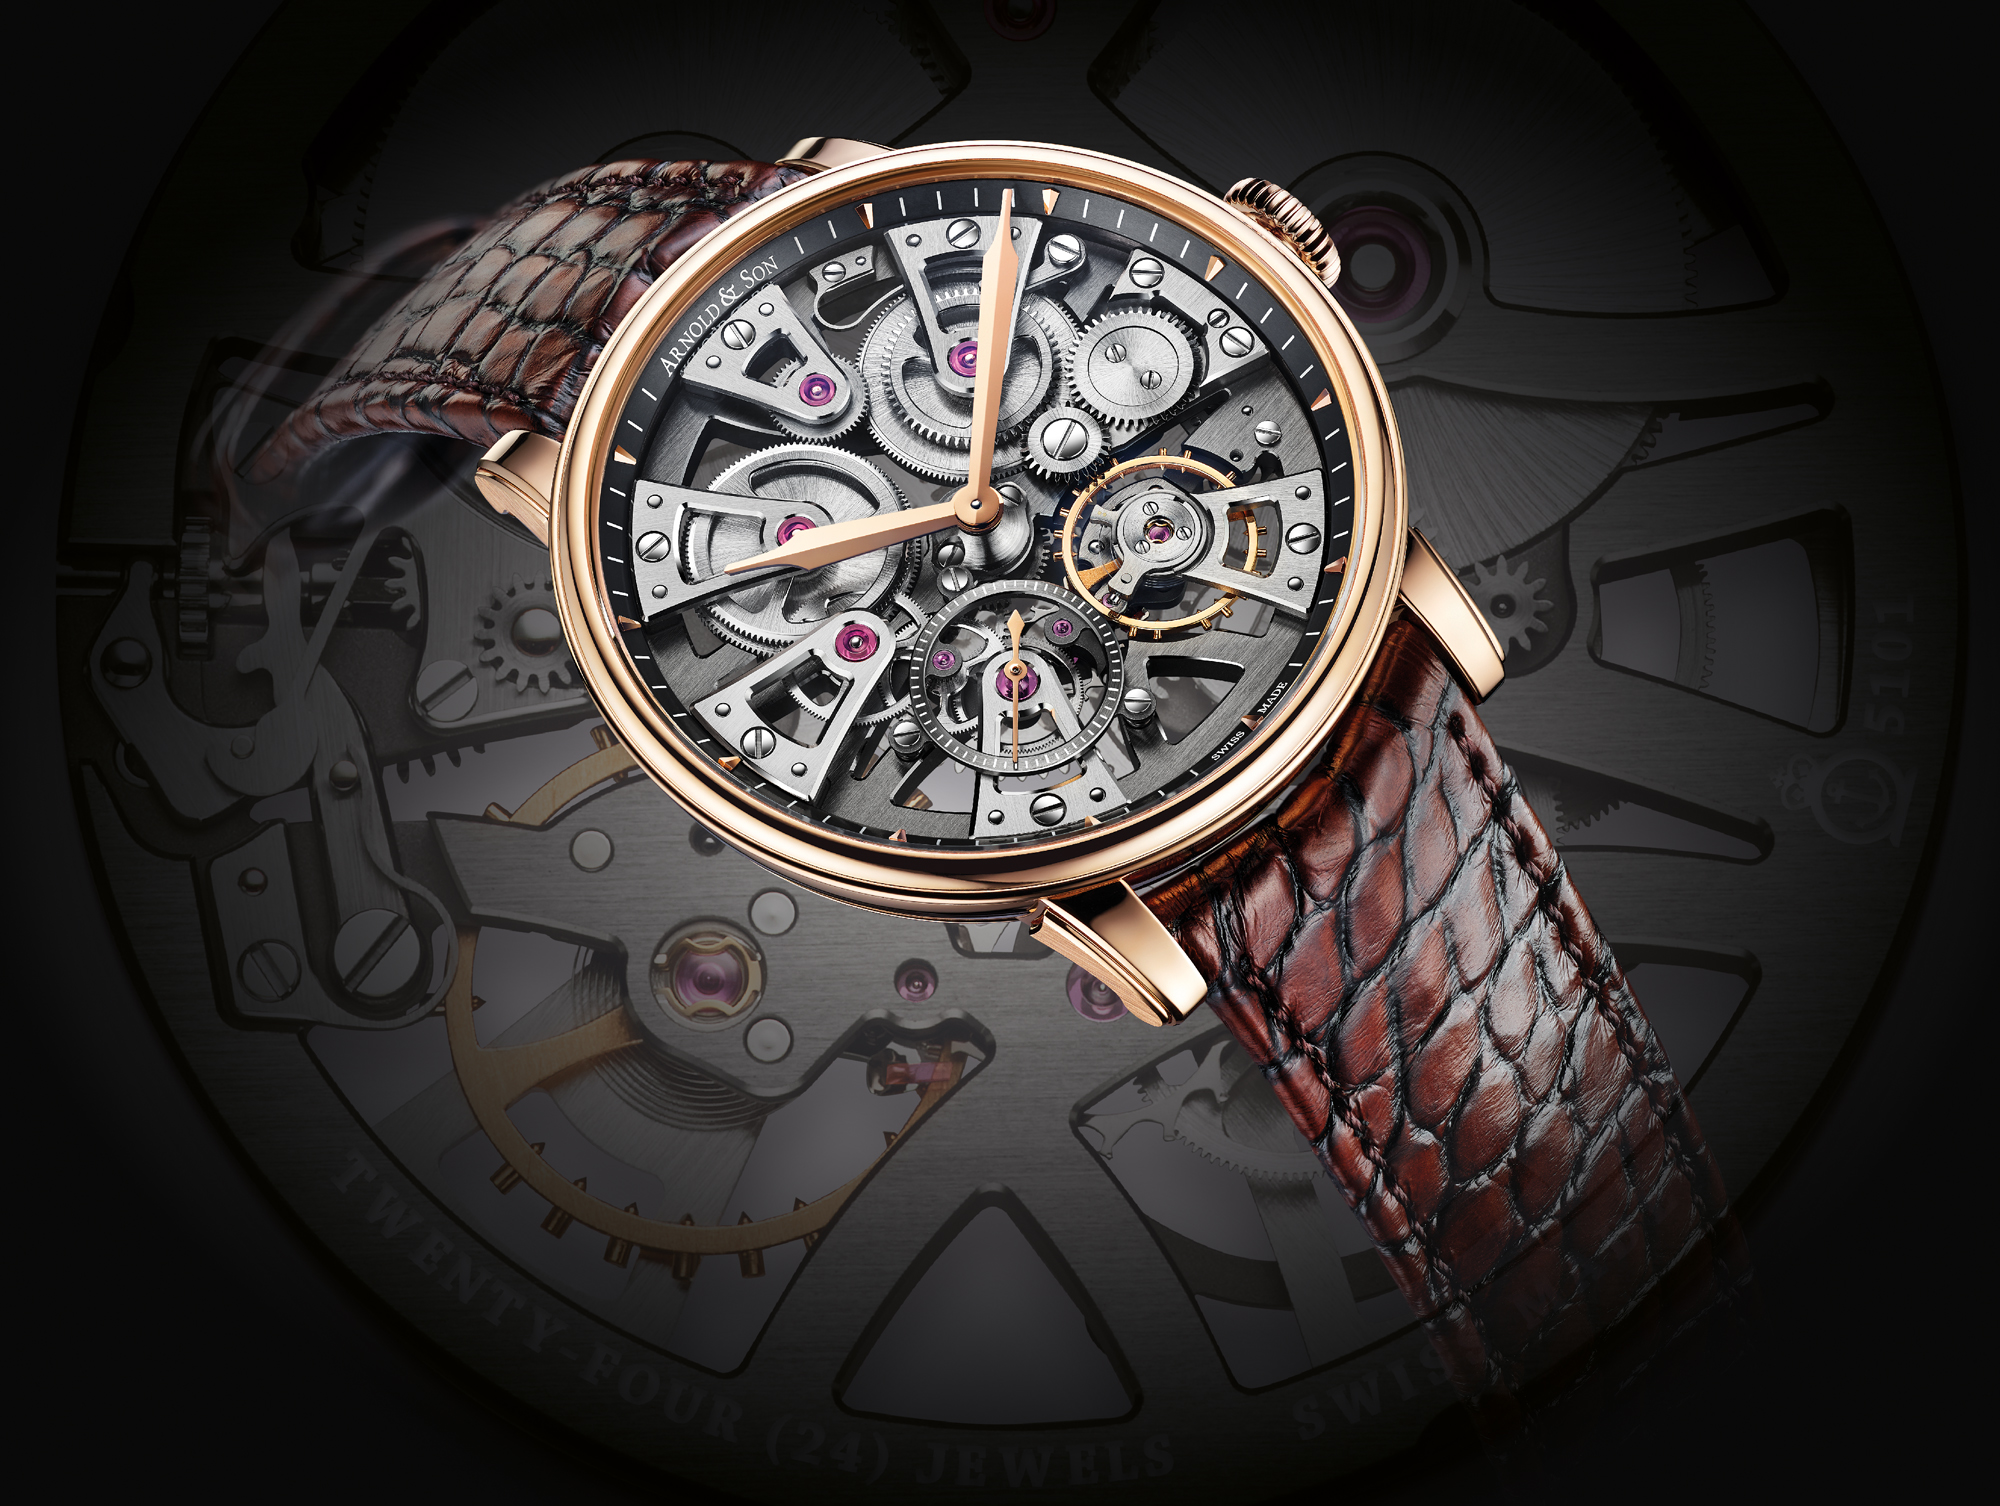 Offering a view into the heart of the in-house manufacture calibre, the three-dimensional, openworked Nebula comes in a reinvented 38mm gold case. Designed from the ground up, the 50-piece limited edition comes equipped with the hand-wound A&S 5101 calibre housing a 90-hour power reserve. Available in 18k red gold with two strap options – brandy leather and grey leather – the new Nebula is priced at CHF 23,300 (approx.).